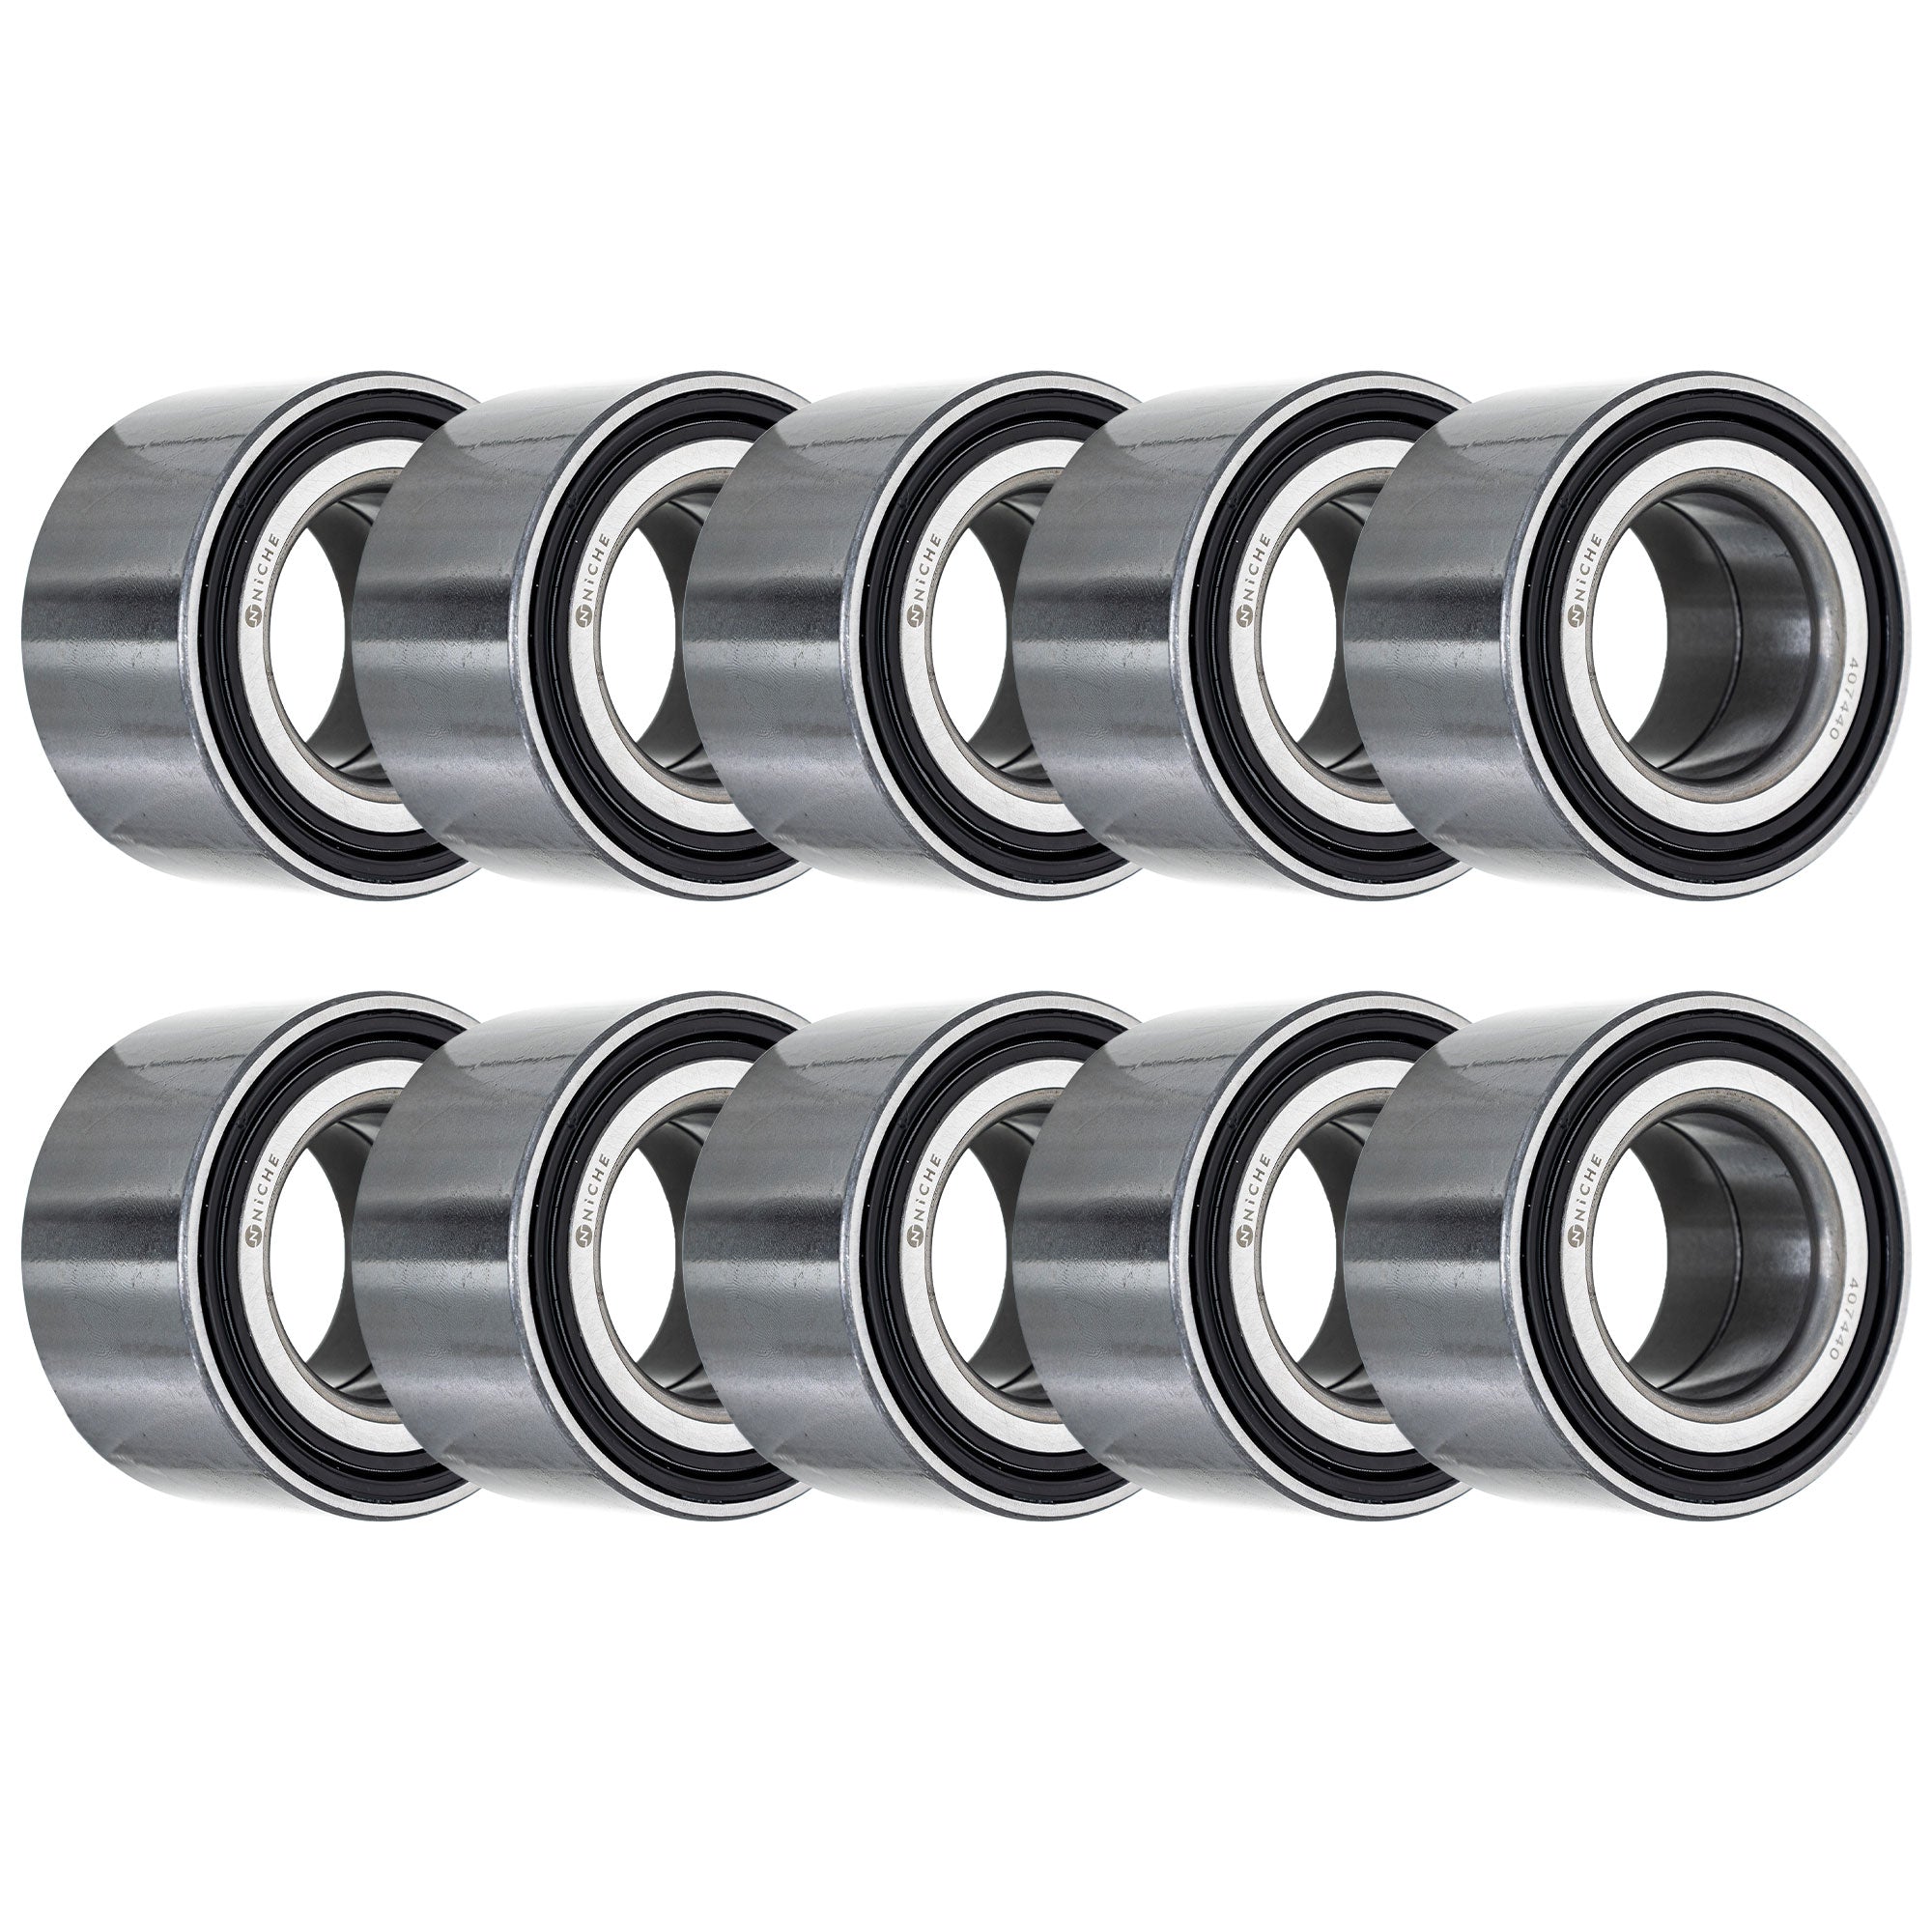 Double Row, Angular Contact, Ball Bearing Pack of 10 10-Pack for zOTHER GEM Stateline NICHE 519-CBB2259R